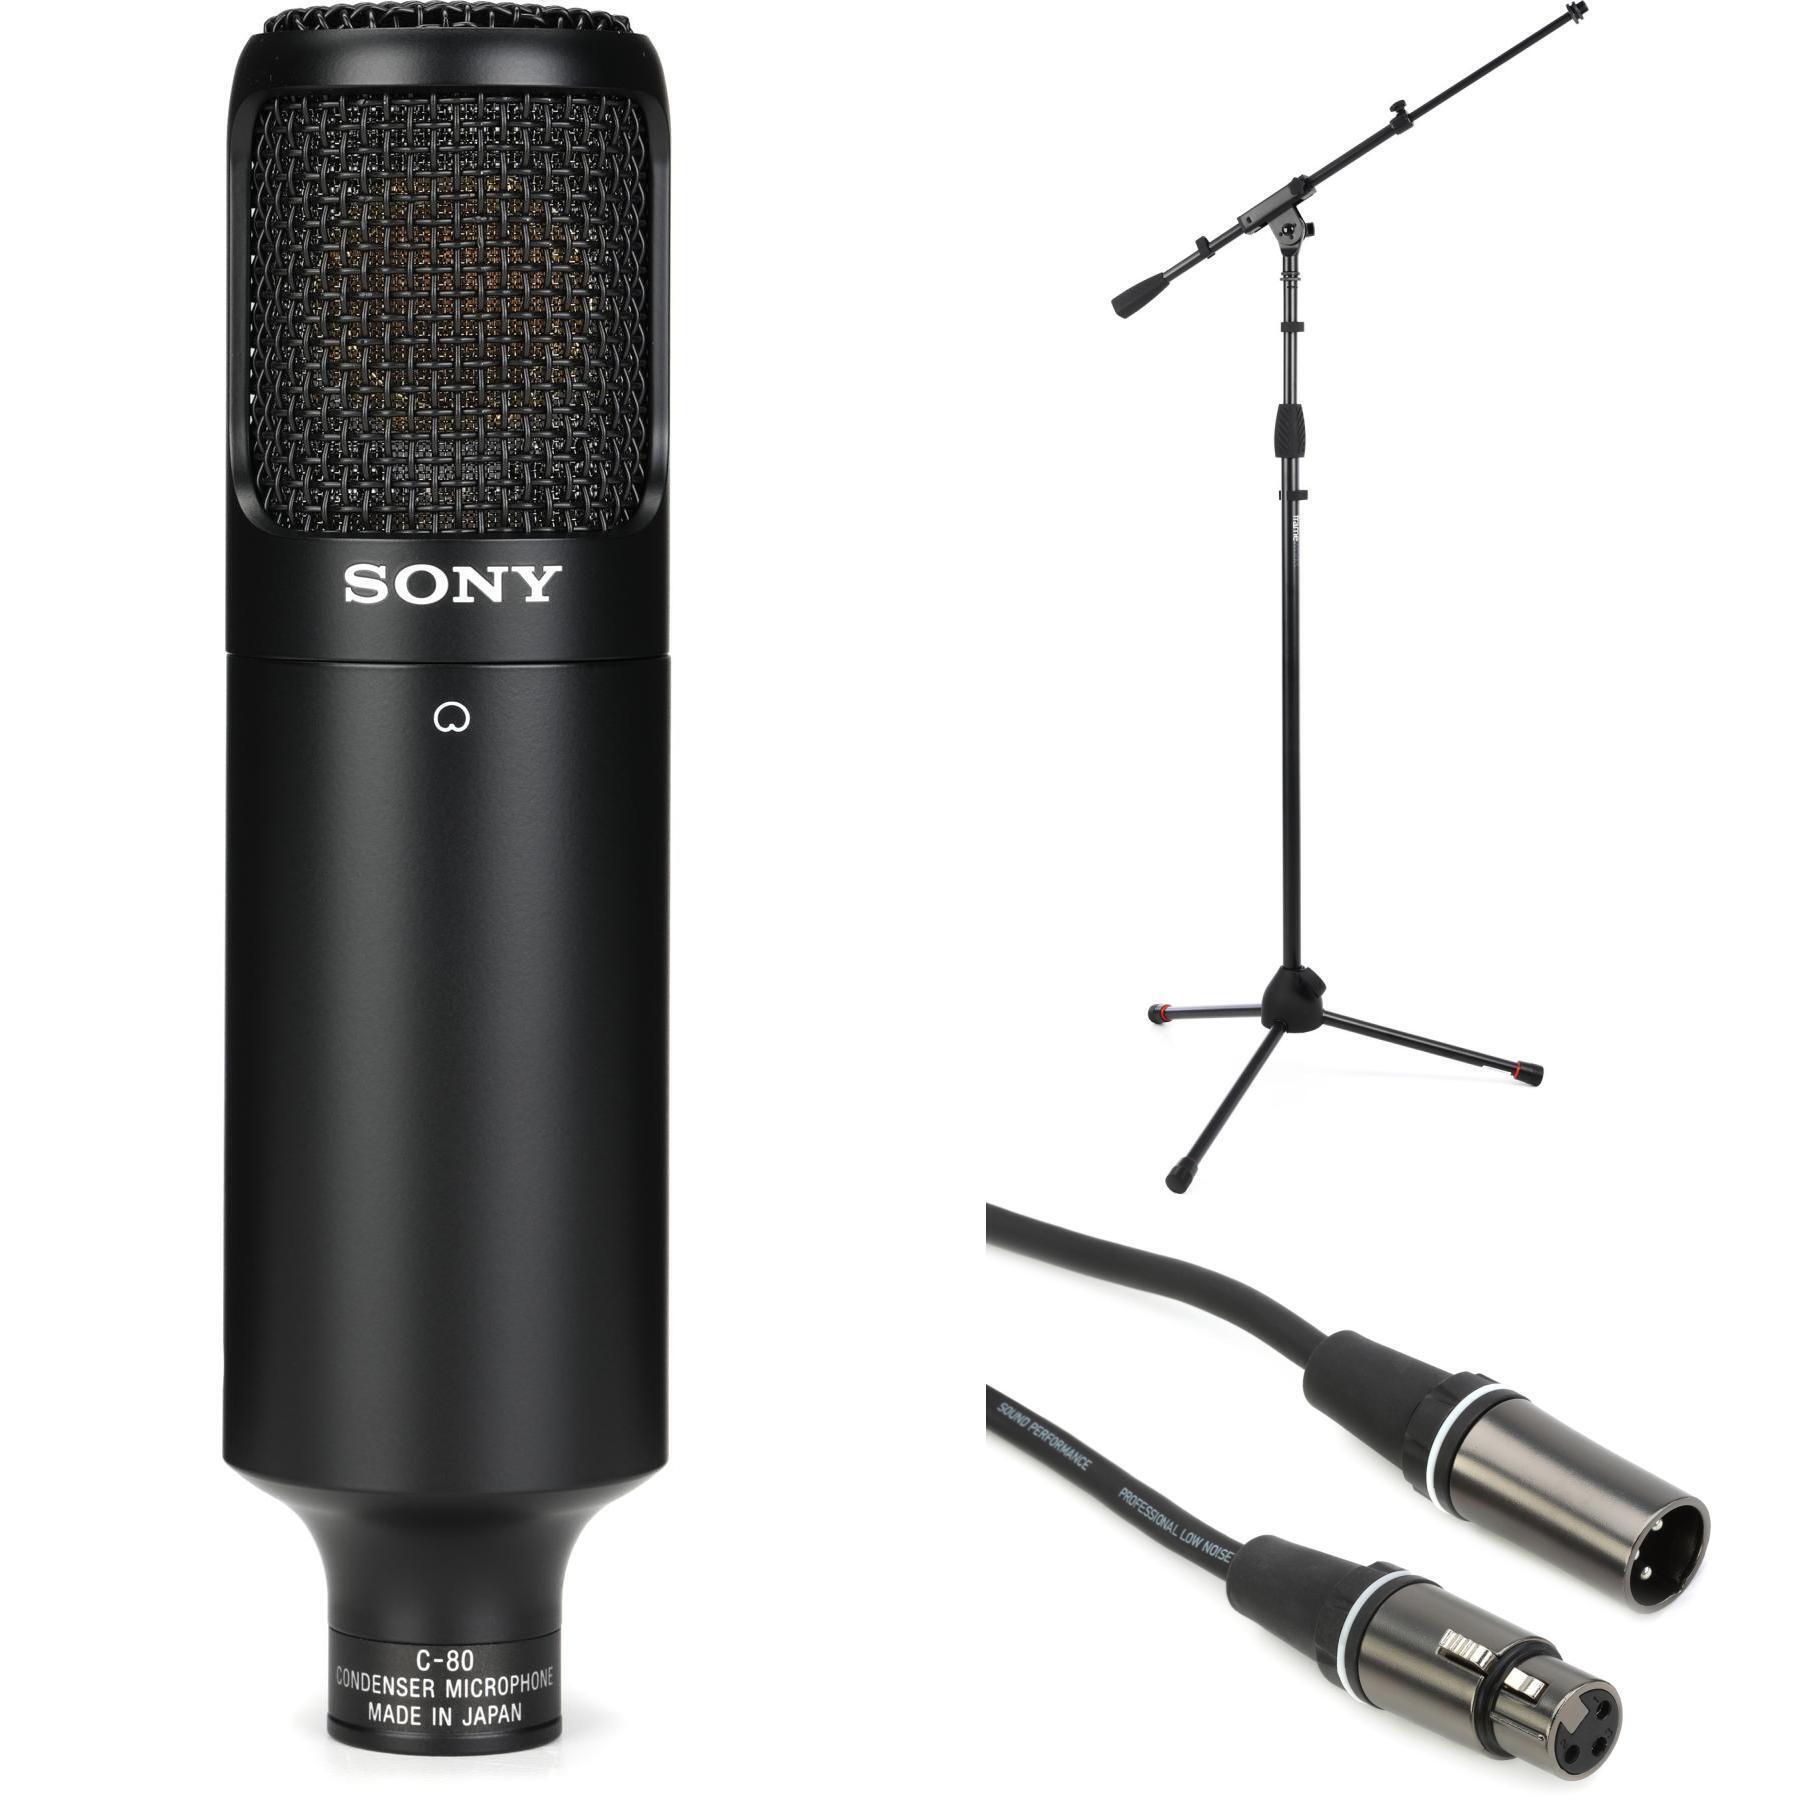 Sony C-80 Condenser Microphone with Stand and Cable